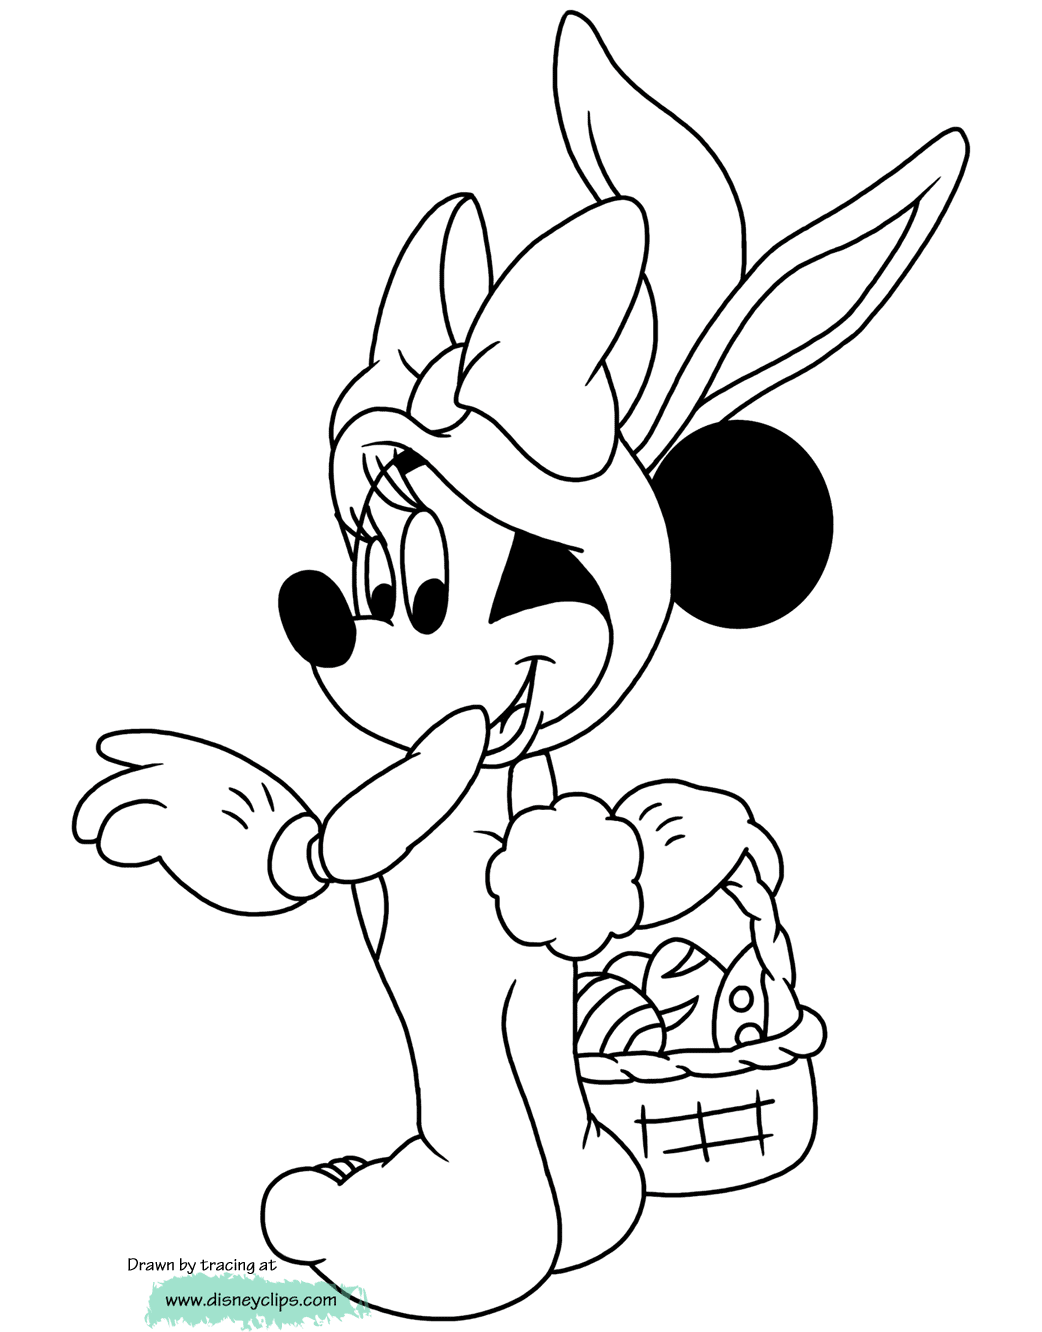 Minnie as the Easter bunny coloring page